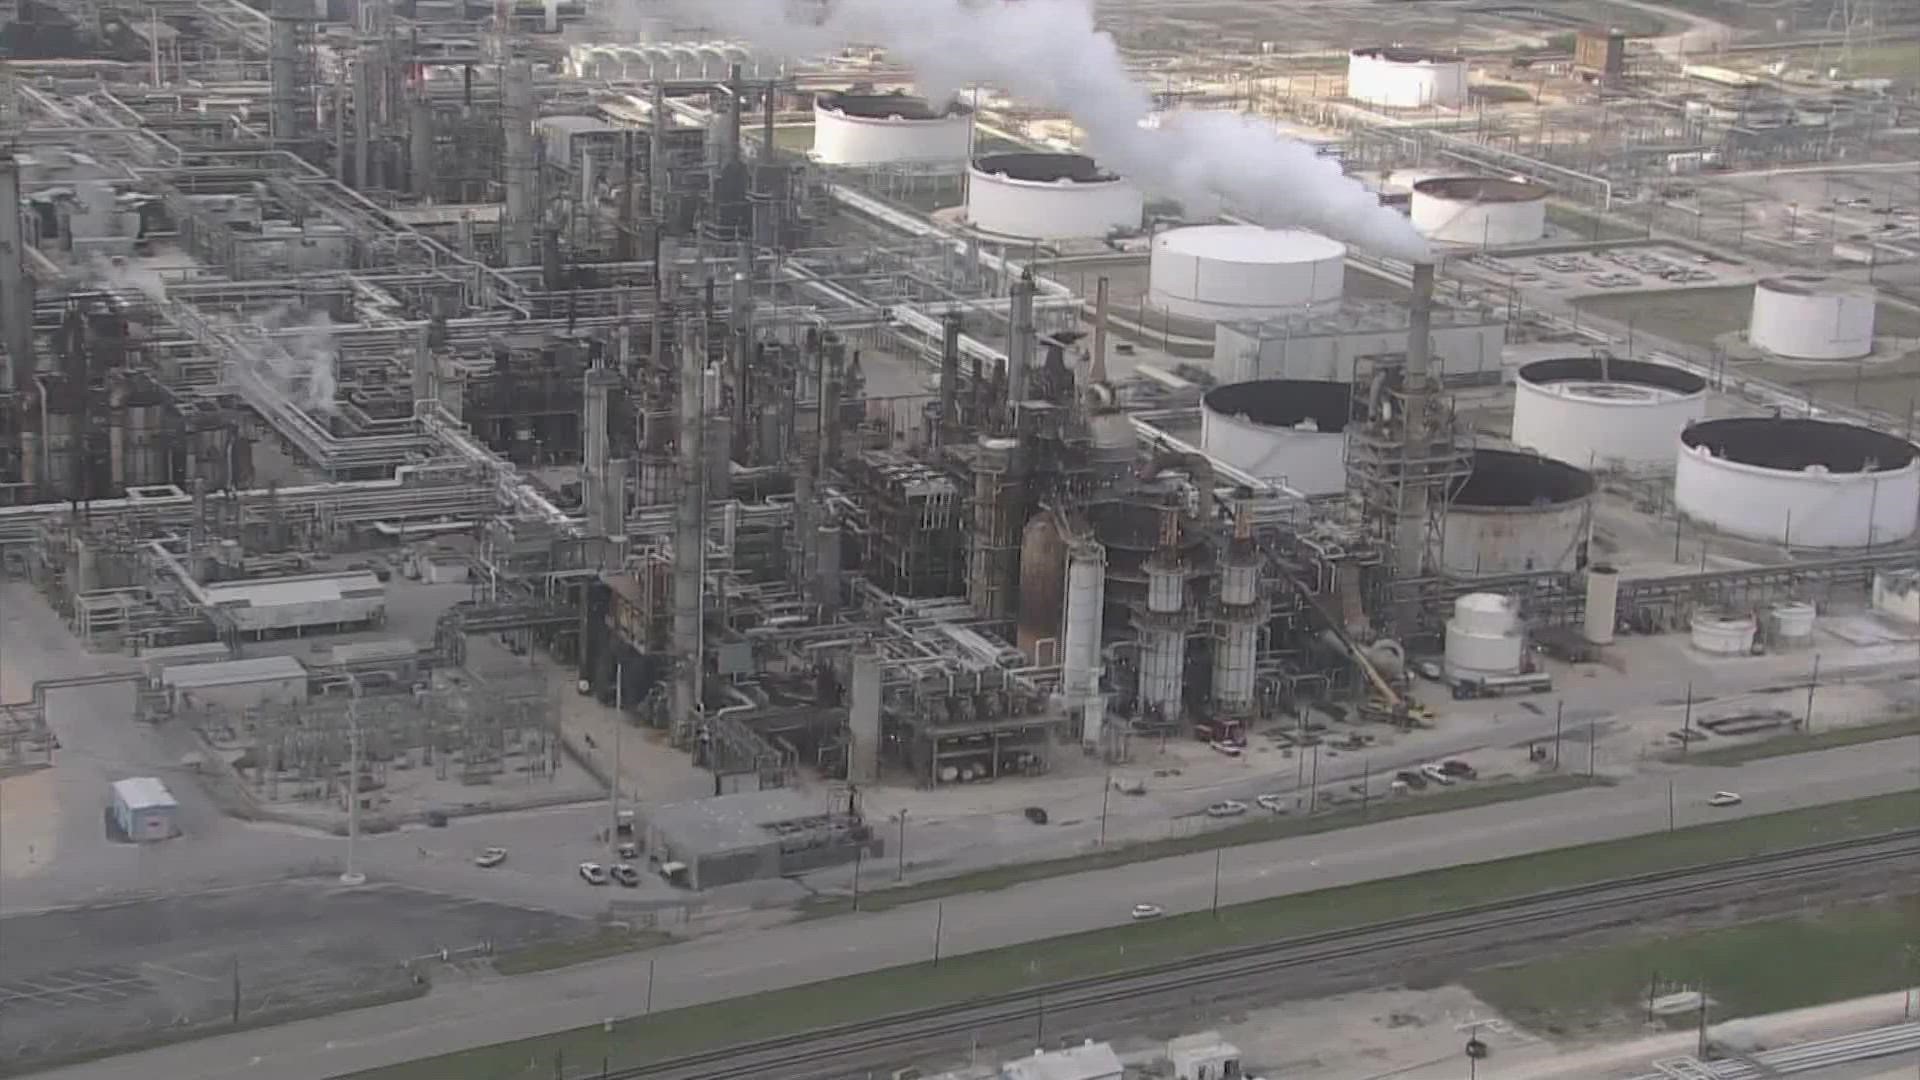 LyondellBasell announced Thursday it's closing its Houston refinery next year and is exiting the refining business.